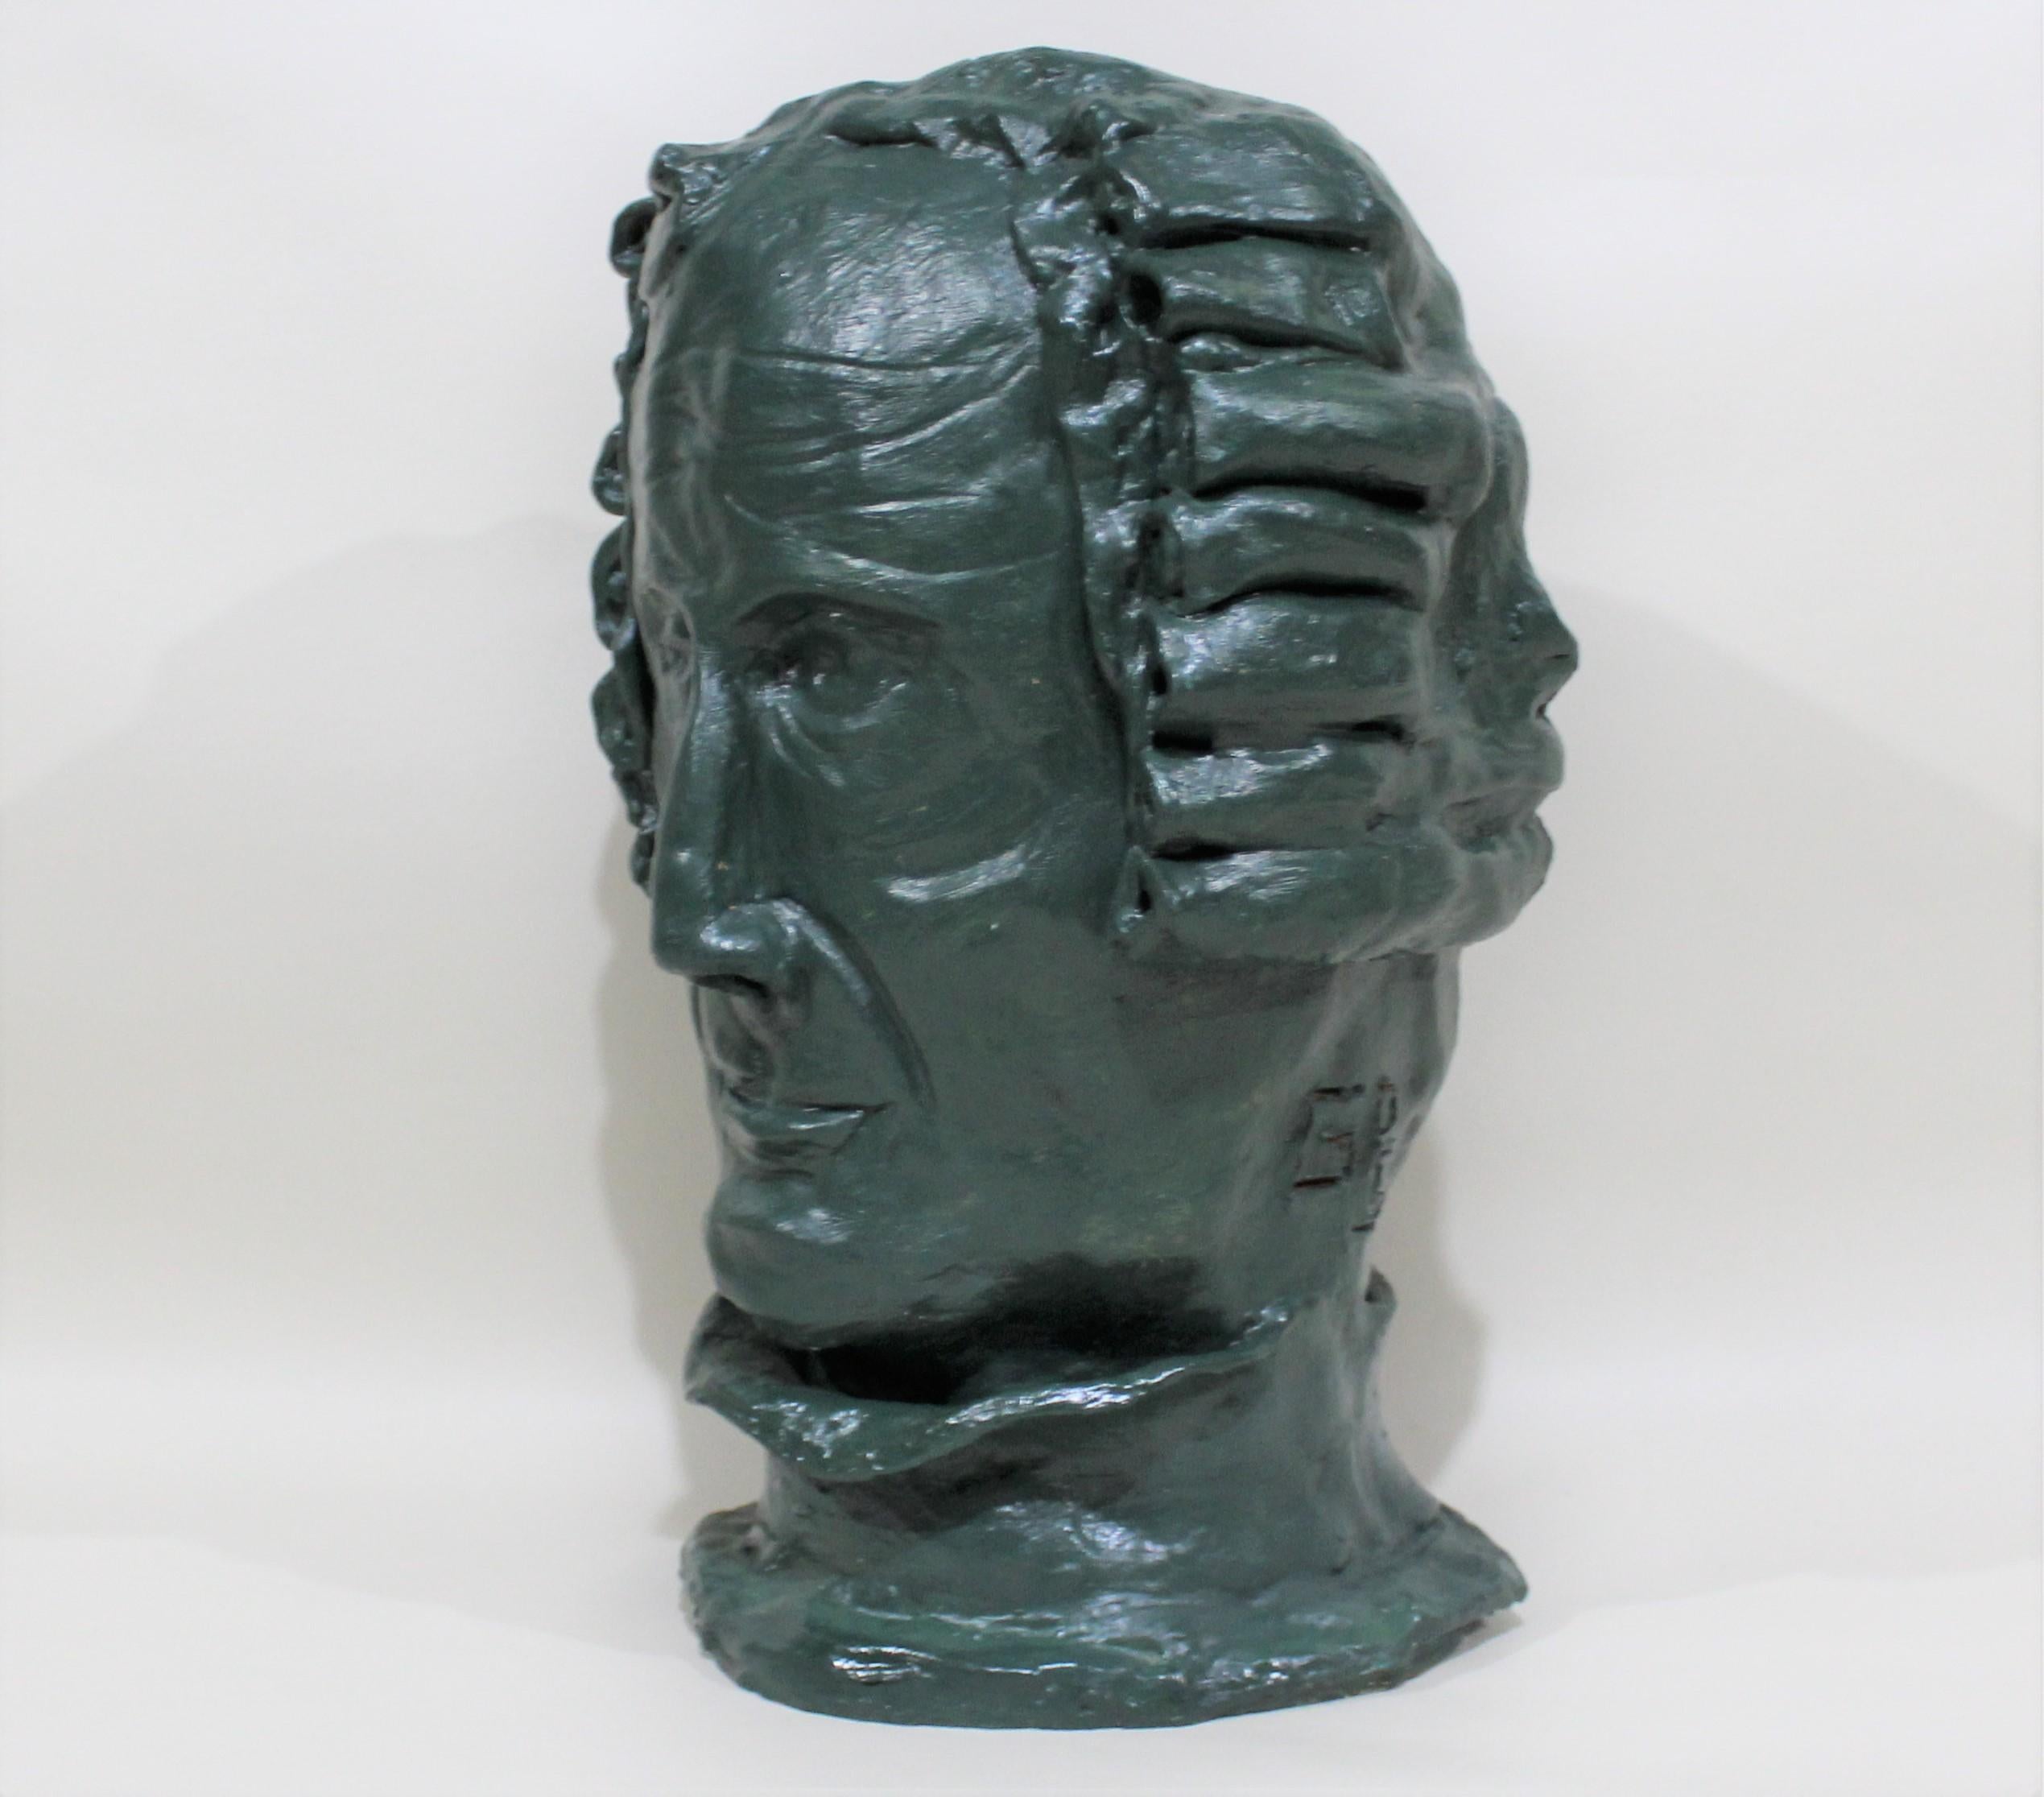 Double faced sculpture of famous 18th century opera composers Jean-Philippe Rameau and Christoph Willibald Gluck.